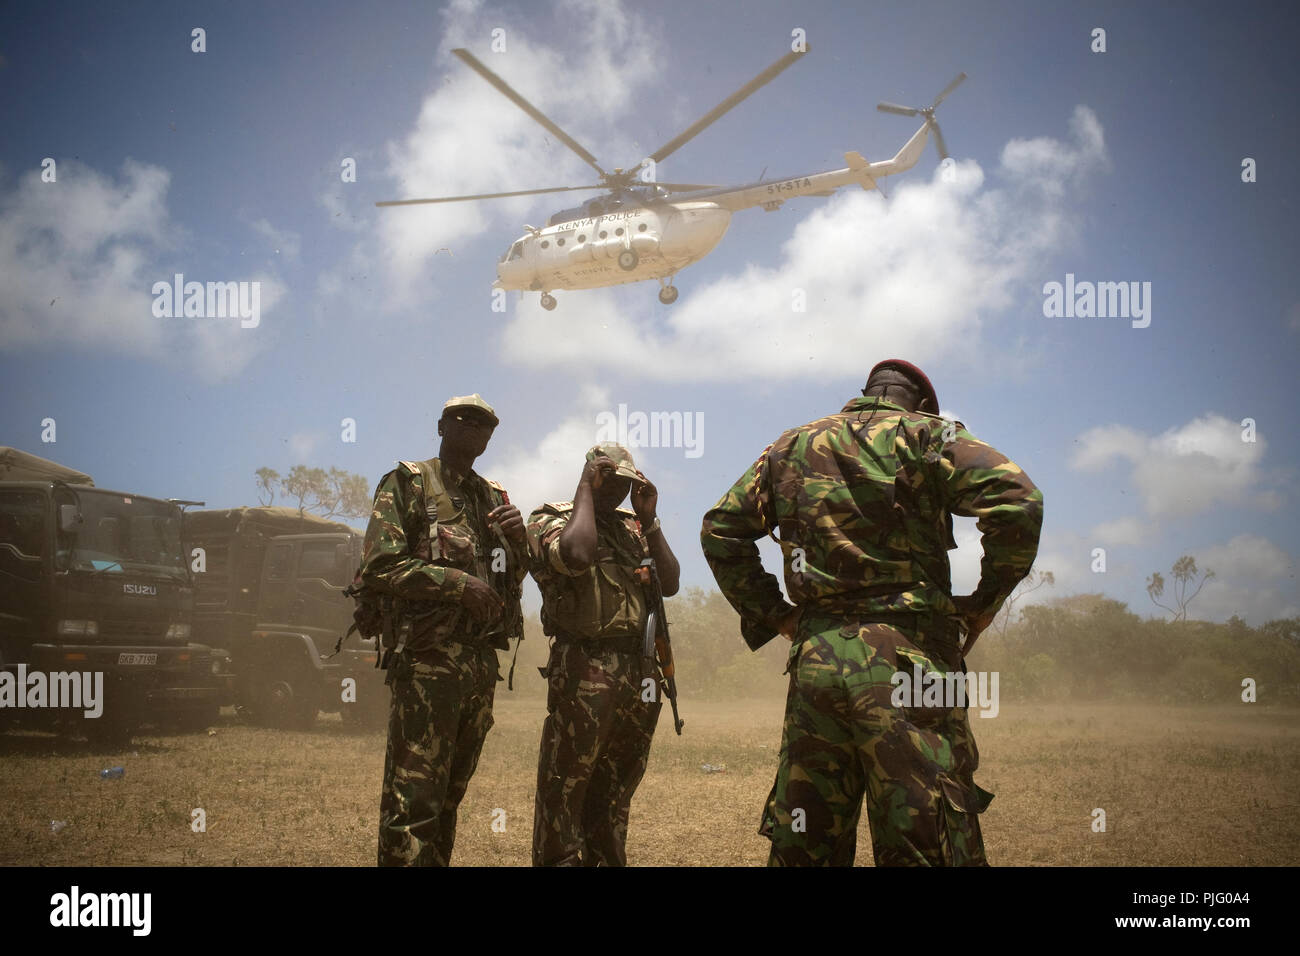 Kenyan security personnel shields from the wind of a lifting helicopter close to the Kenyan coast, September 20, 2012. Stock Photo